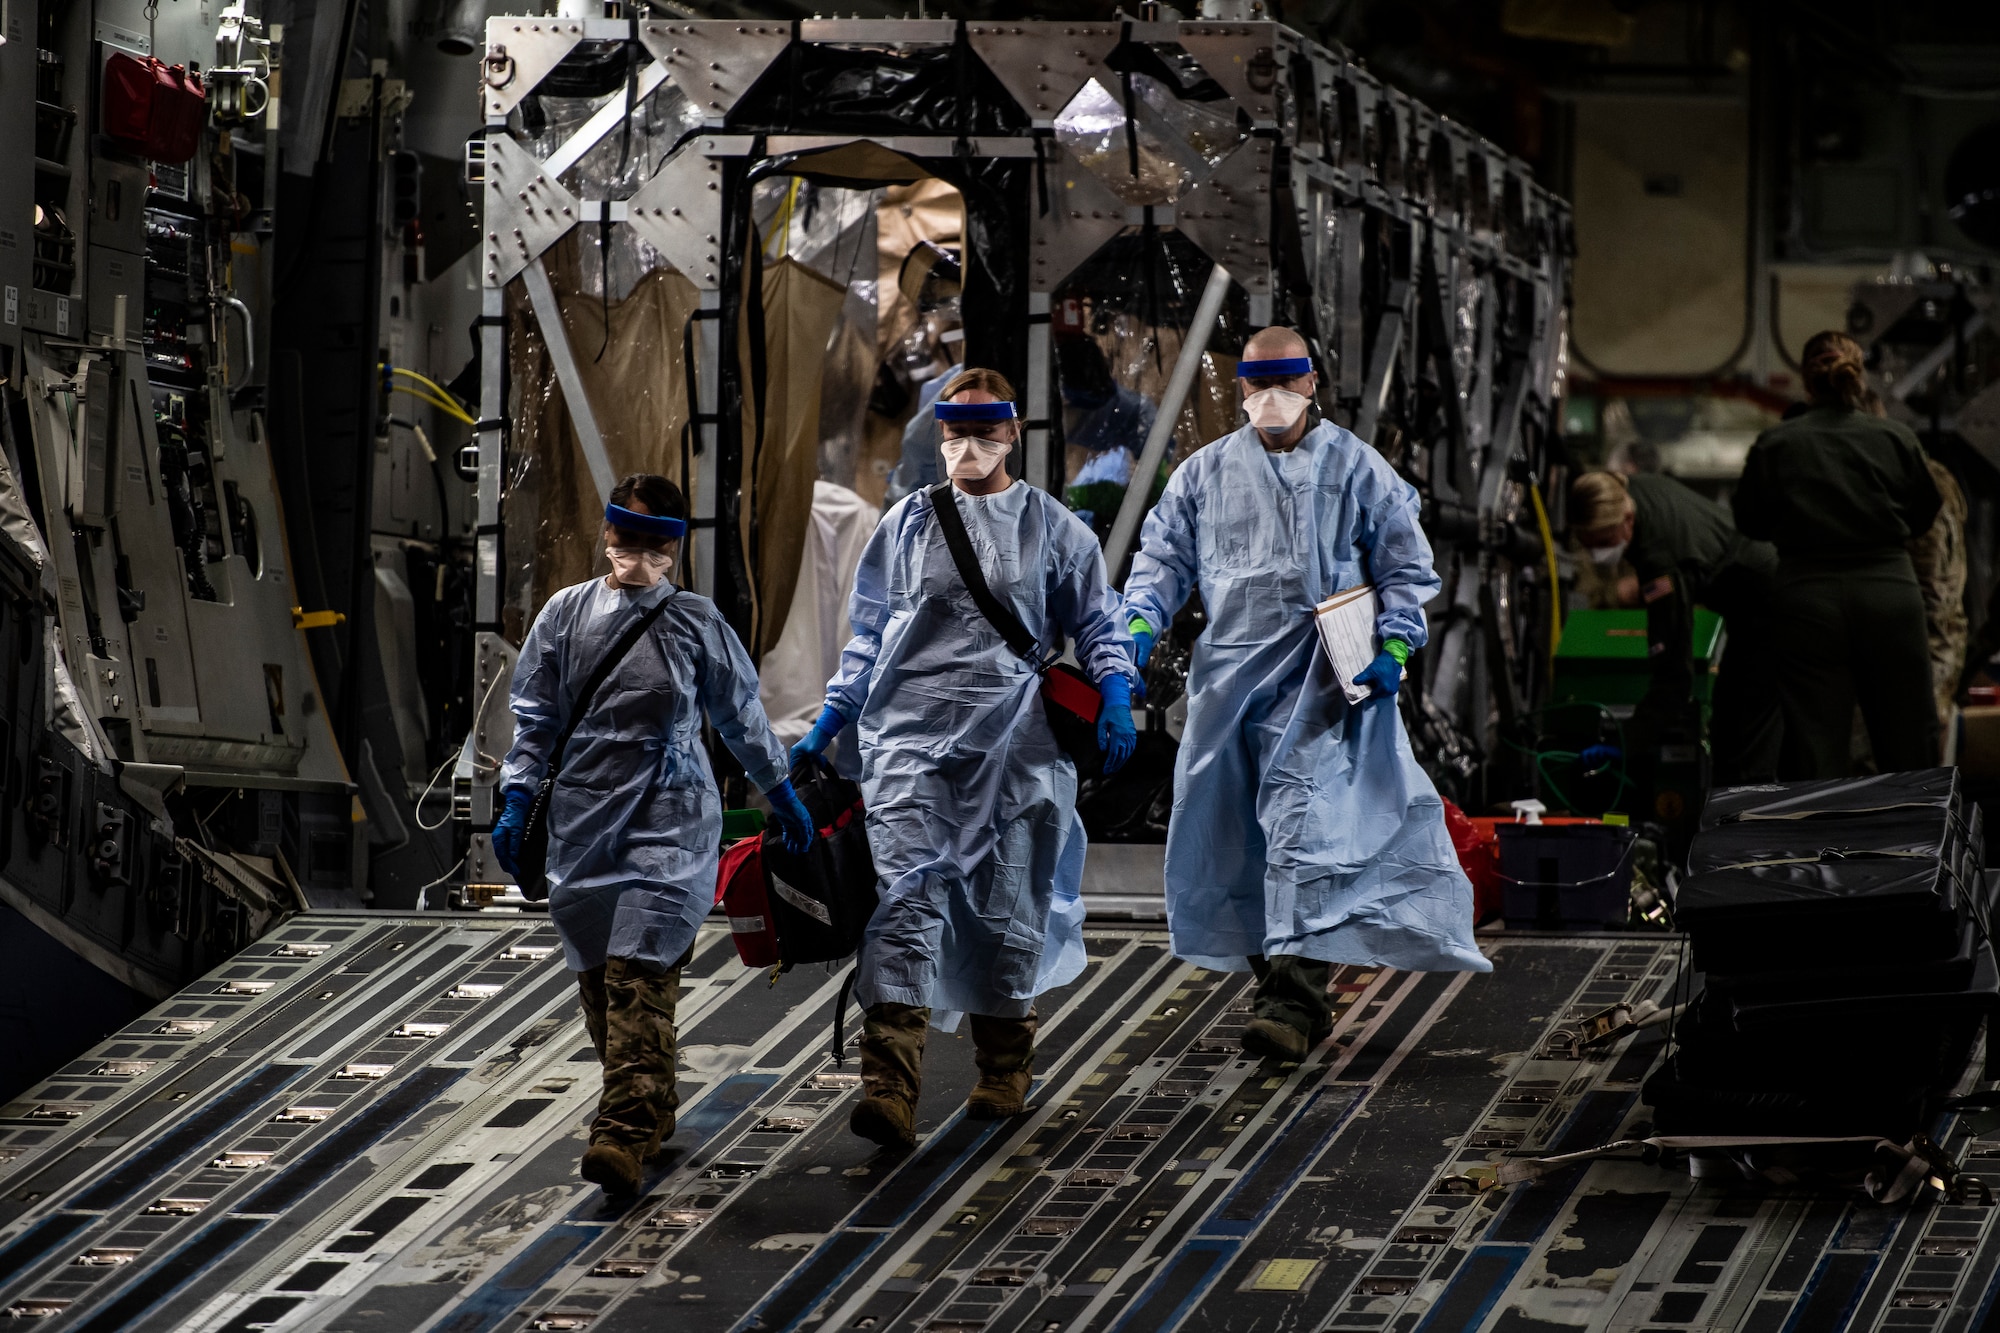 Three U.S. Air Force medical Airmen exit a C-17 Globemaster III aircraft following the first-ever operational use of the Transport Isolation System at Ramstein Air Base, Germany, April 10, 2020. The TIS is an infectious disease containment unit designed to minimize contamination risk to aircrew and medical attendants, while allowing in-flight medical care for patients afflicted by a disease. (U.S. Air Force photo by Staff Sgt. Devin Nothstine)